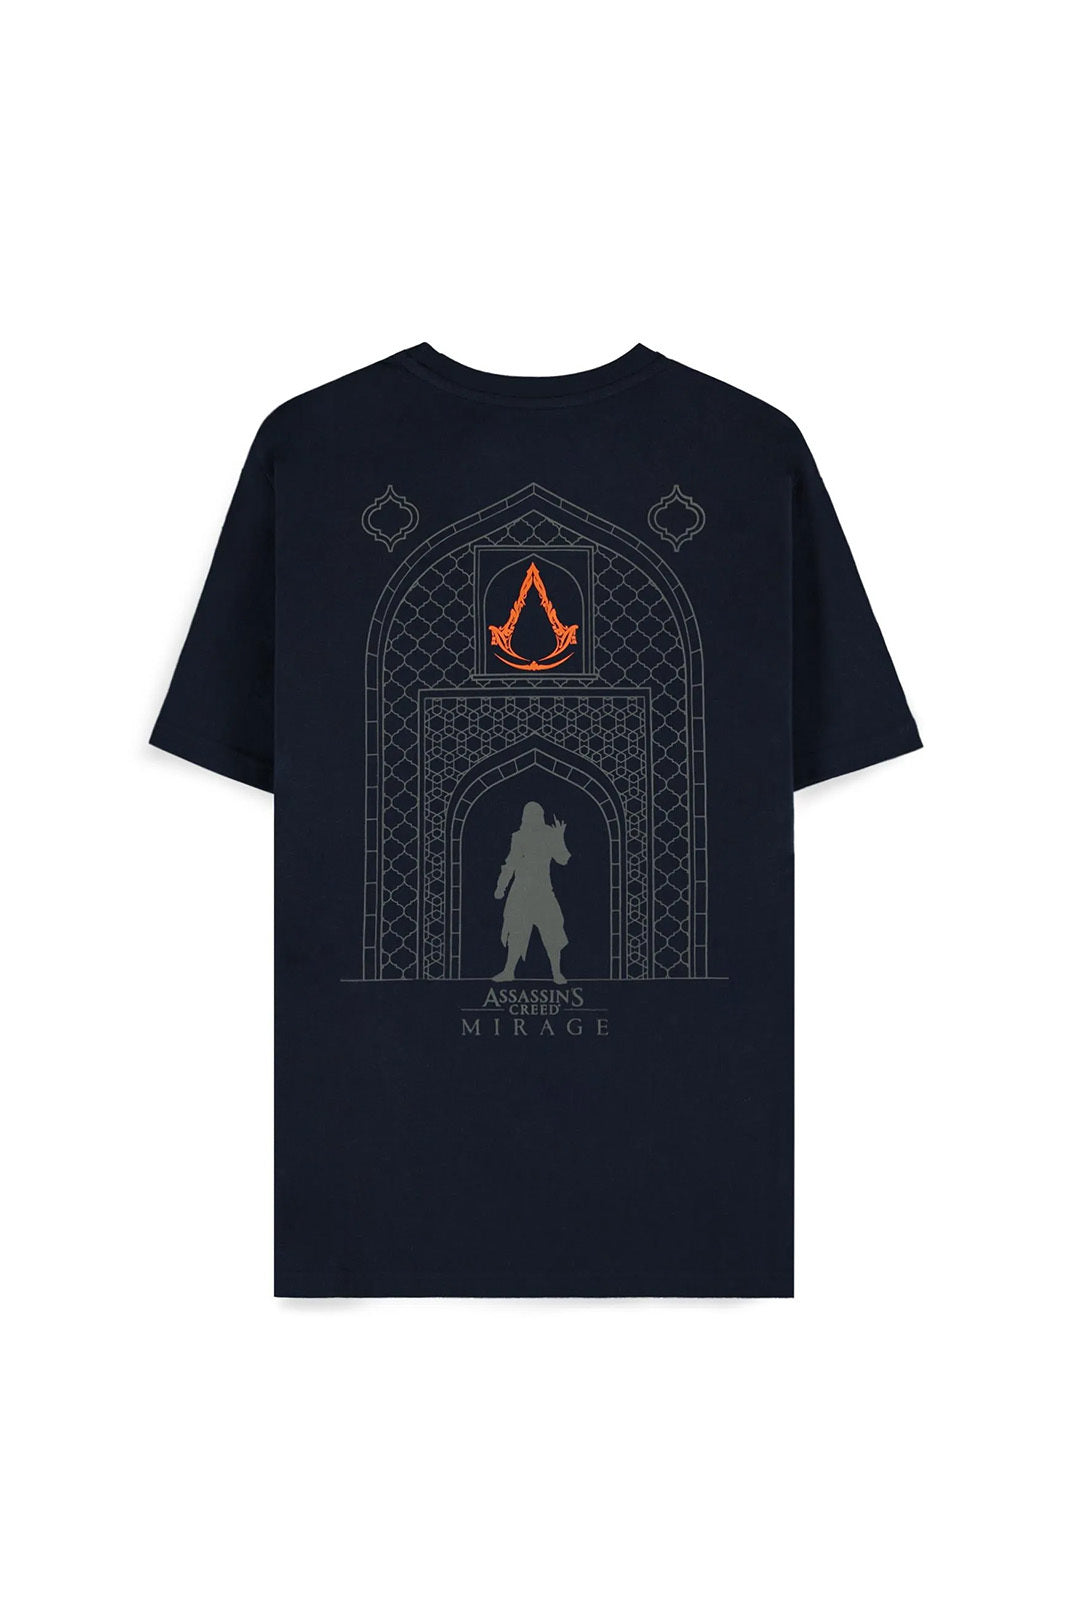 T-Shirt - Assassin's Creed Mirage -  Blade